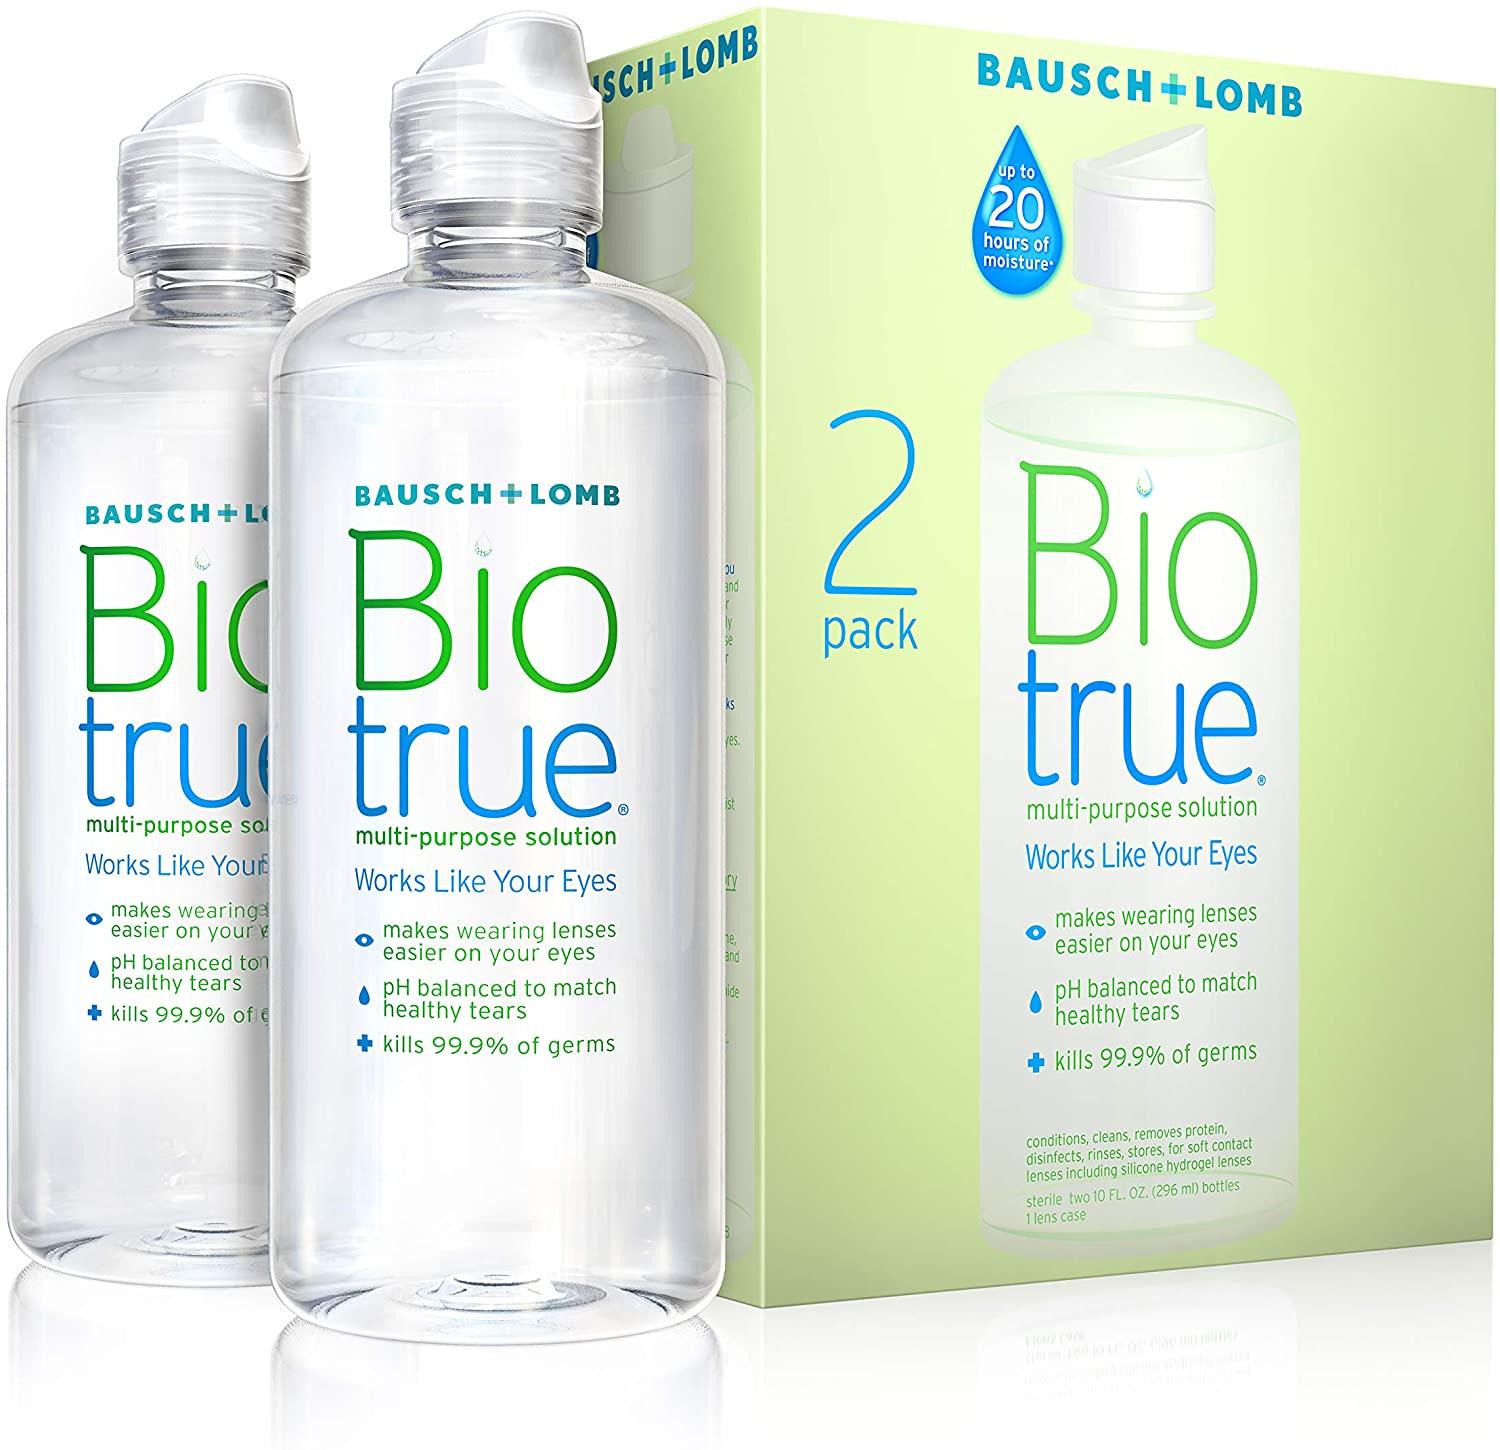 2 Bausch + Lomb Biotrue Soft Contact Lens Multi-Purpose Solution for $9.18 Shipped